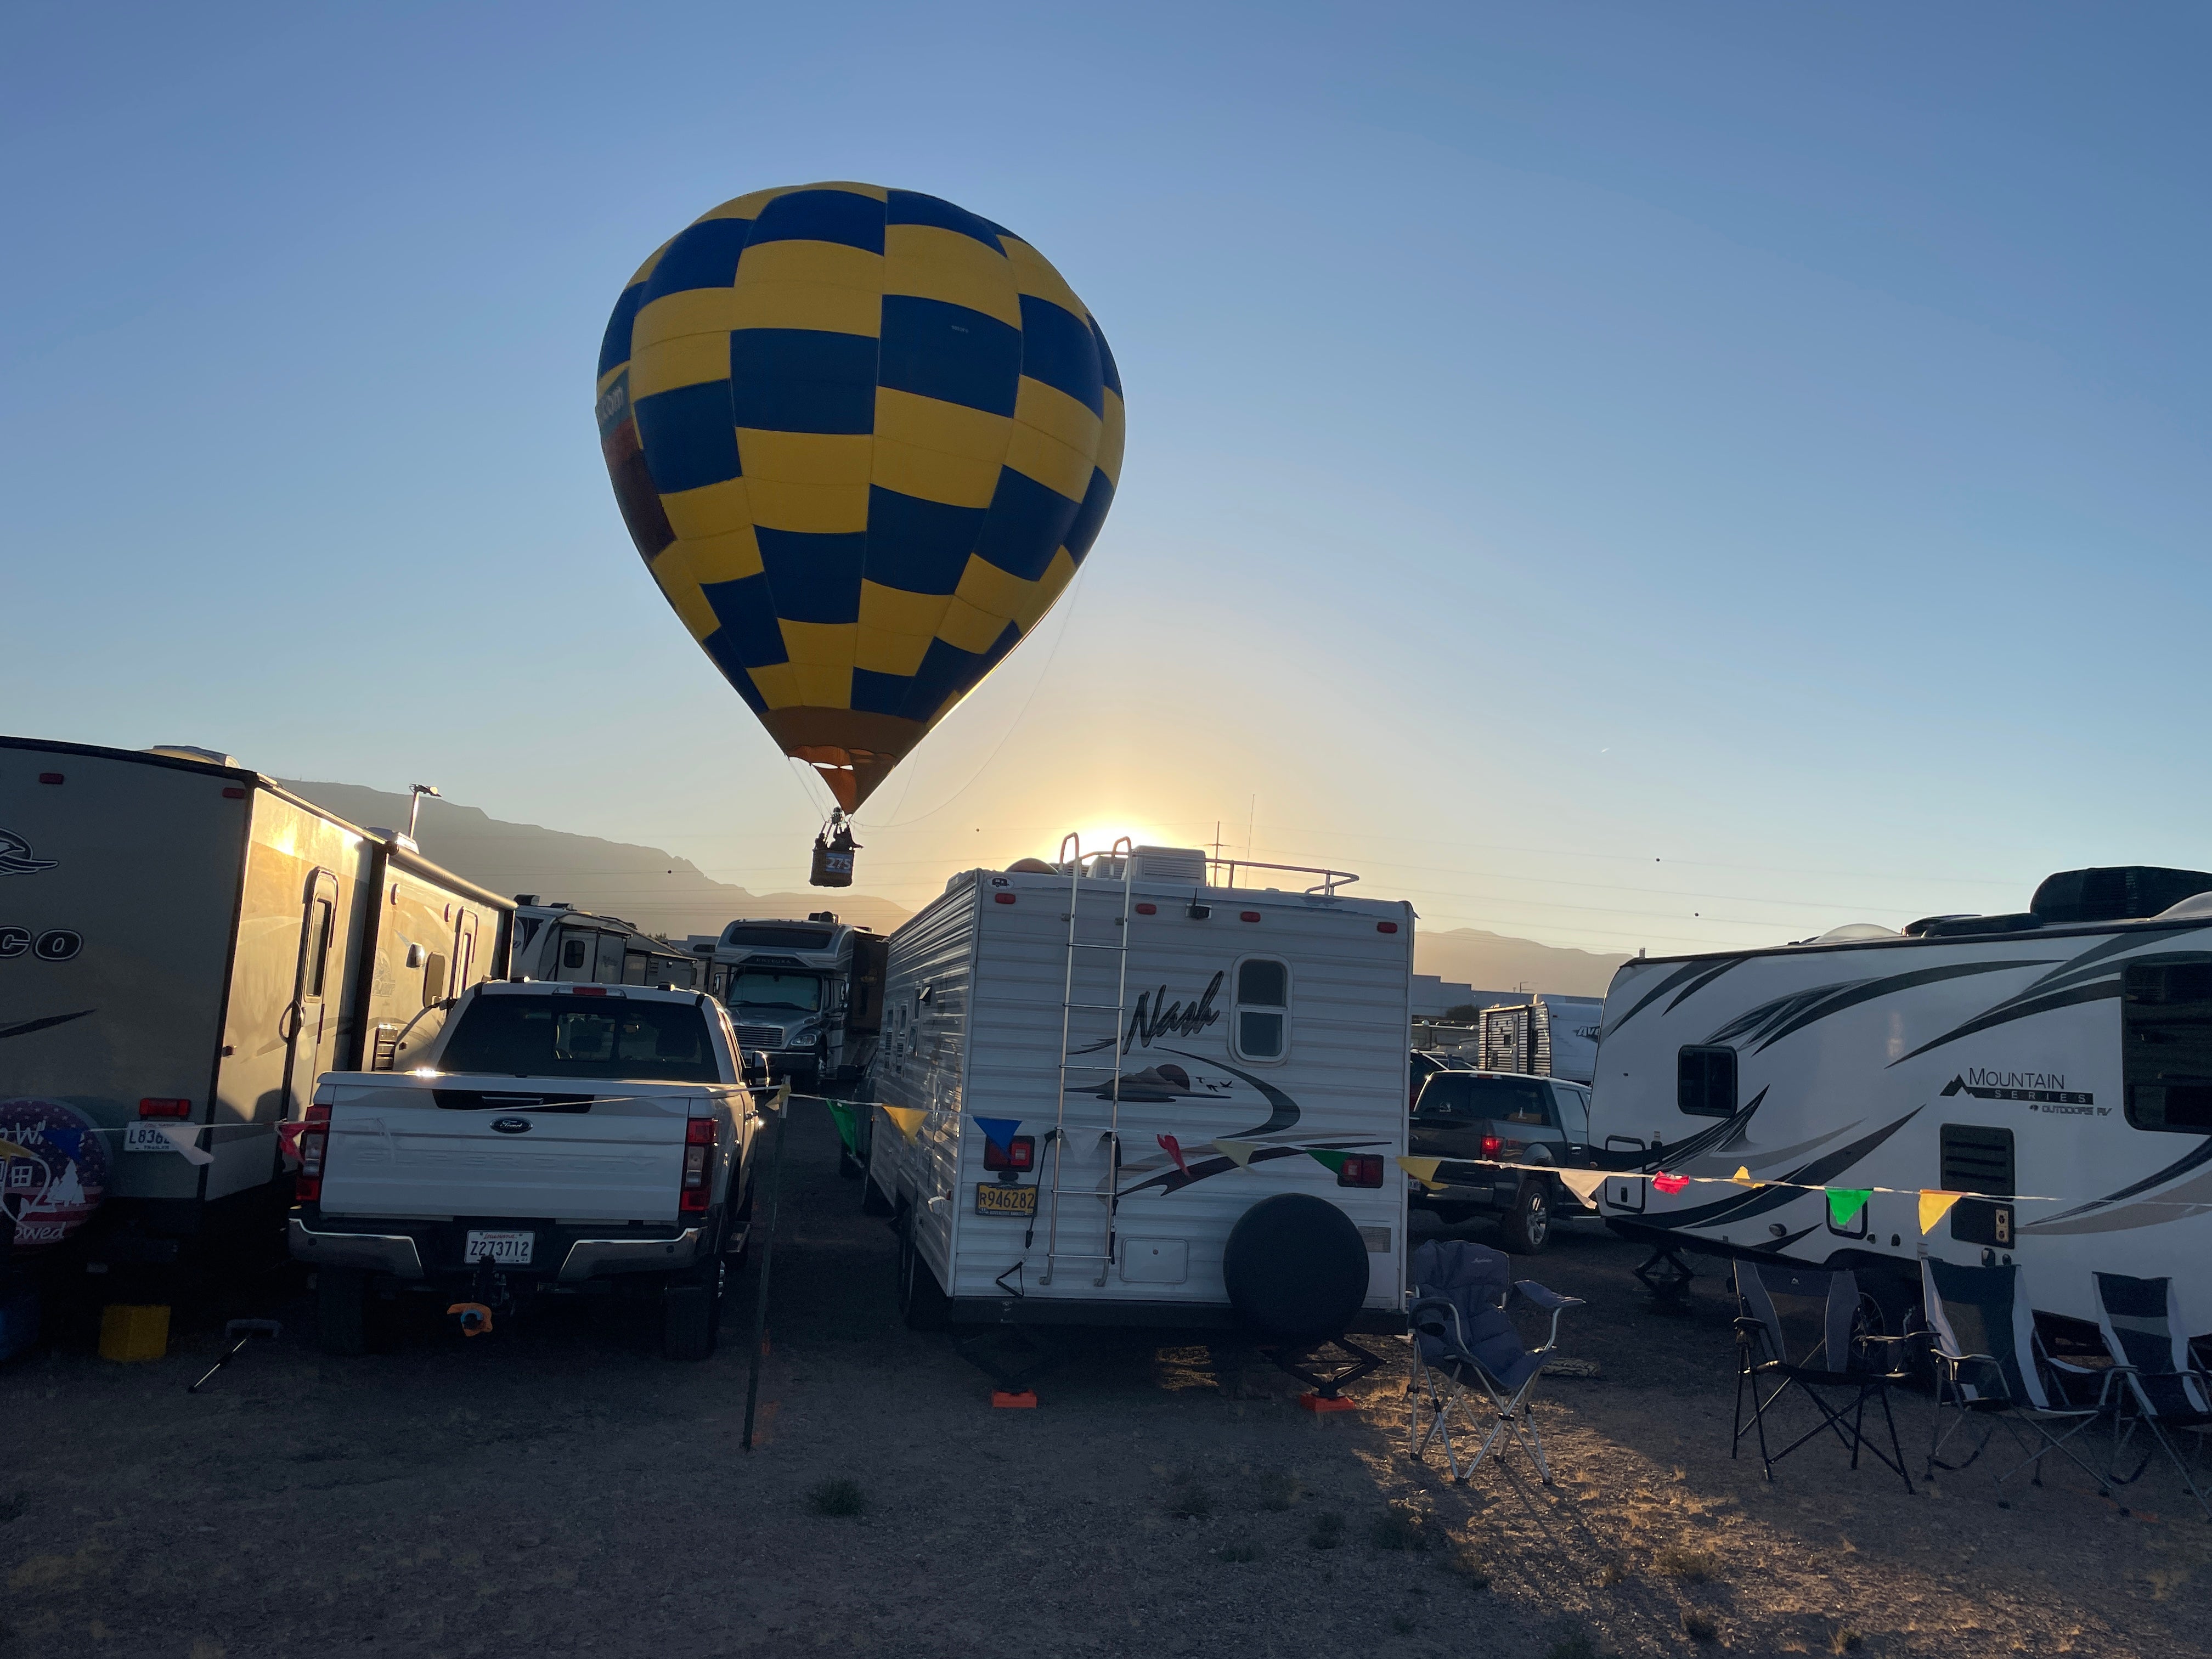 Camper submitted image from Abuquerque International Balloon Fiesta South Lot - 4